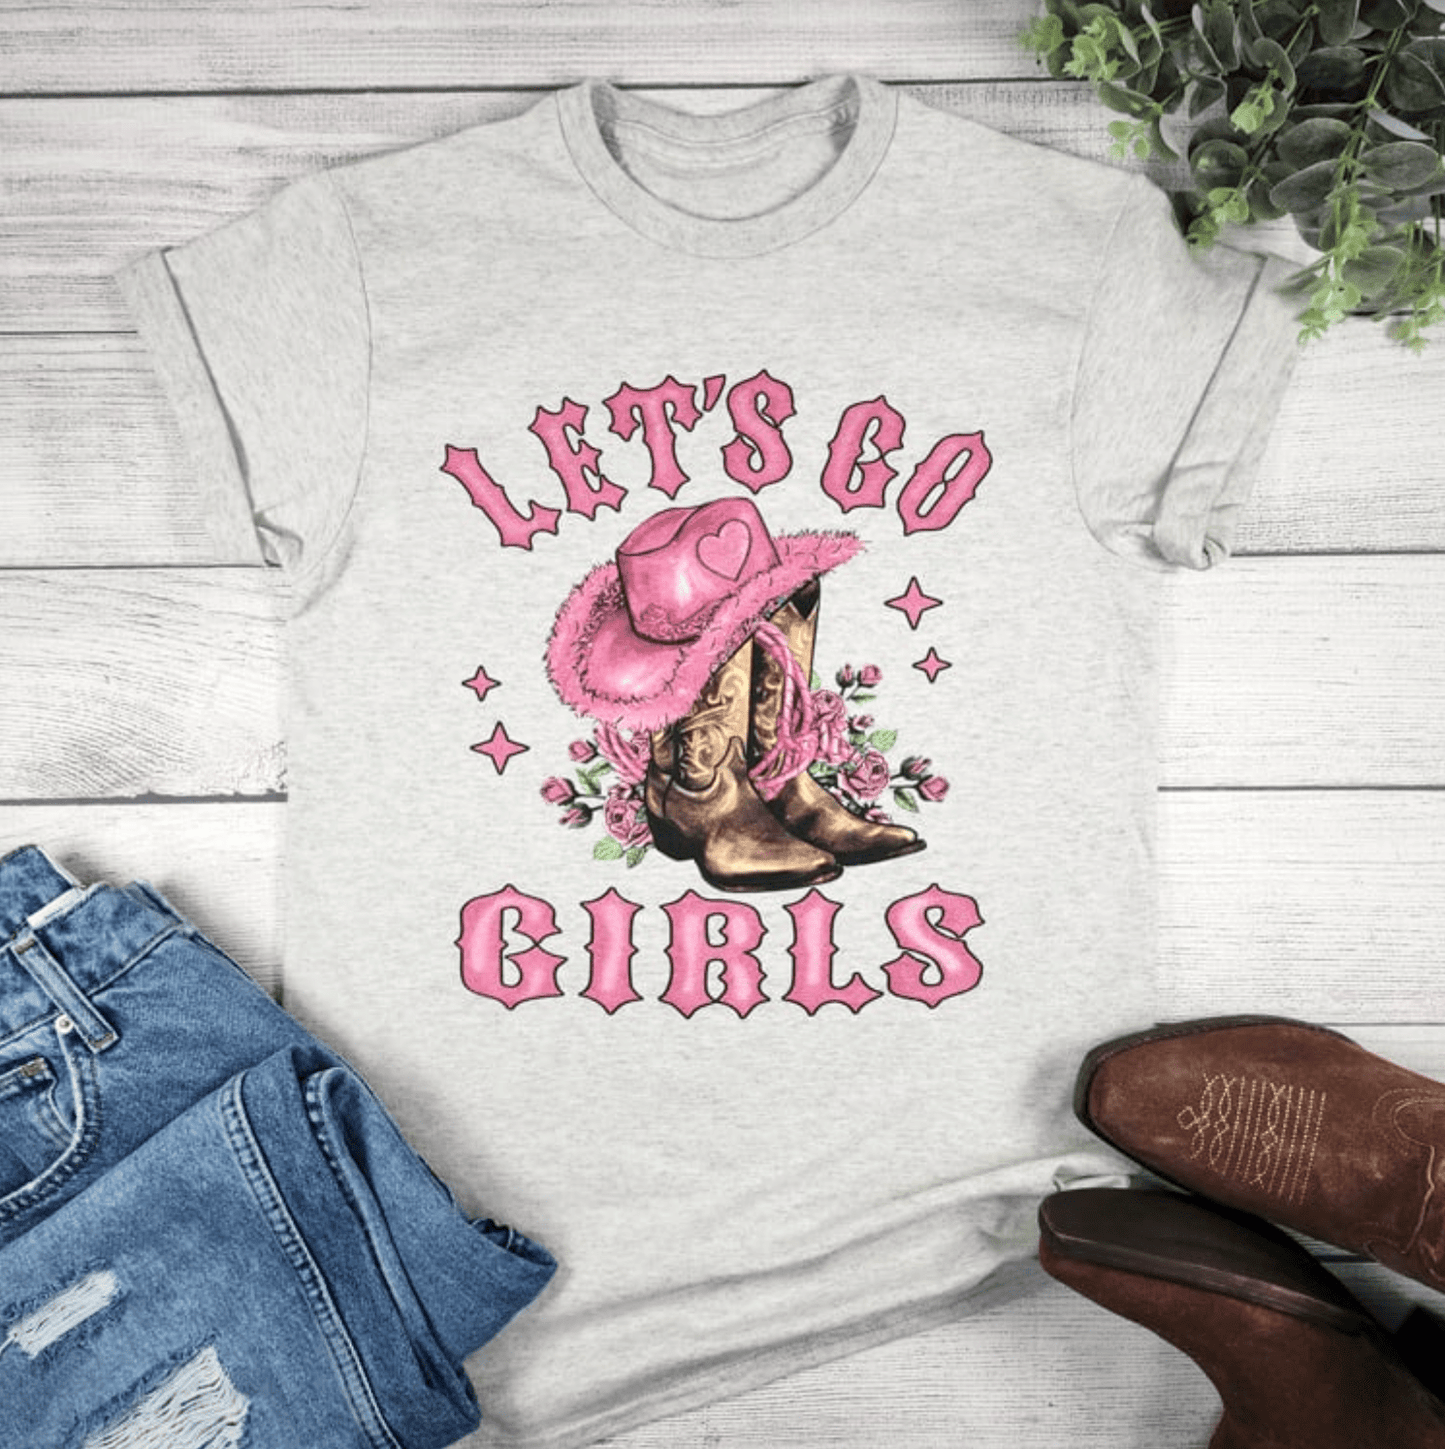 Envy Stylz Boutique Women - Apparel - Shirts - T-Shirts Let's Go Girls Graphic Tee